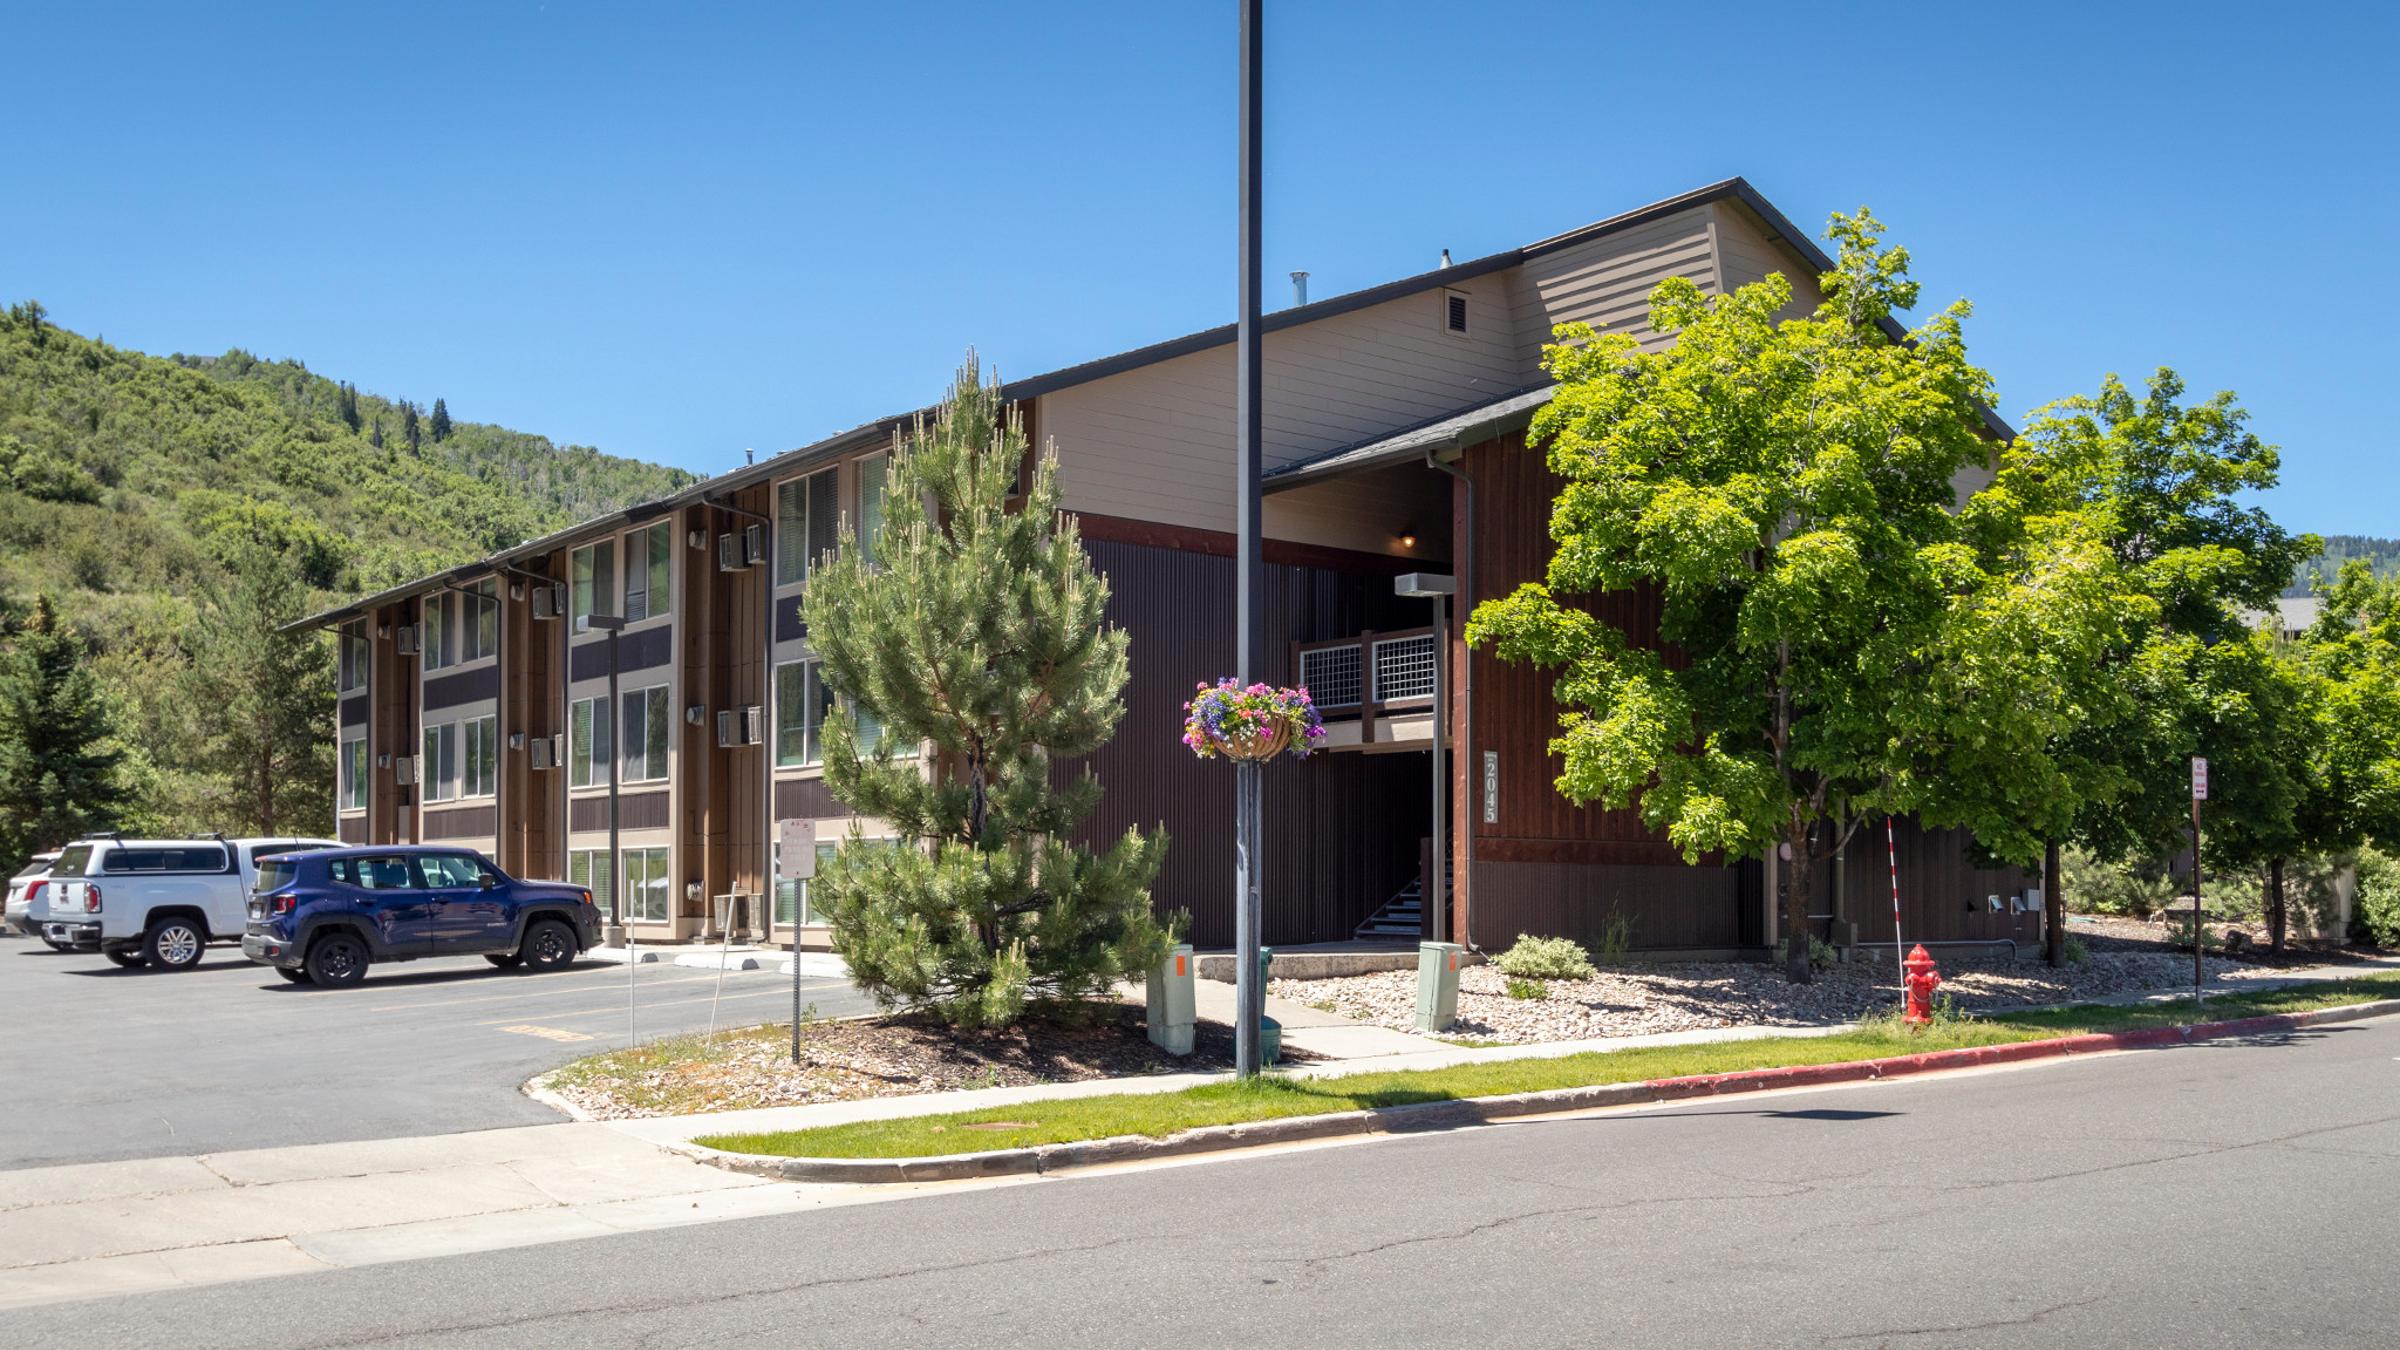 Prospector staff housing exterior in the summer